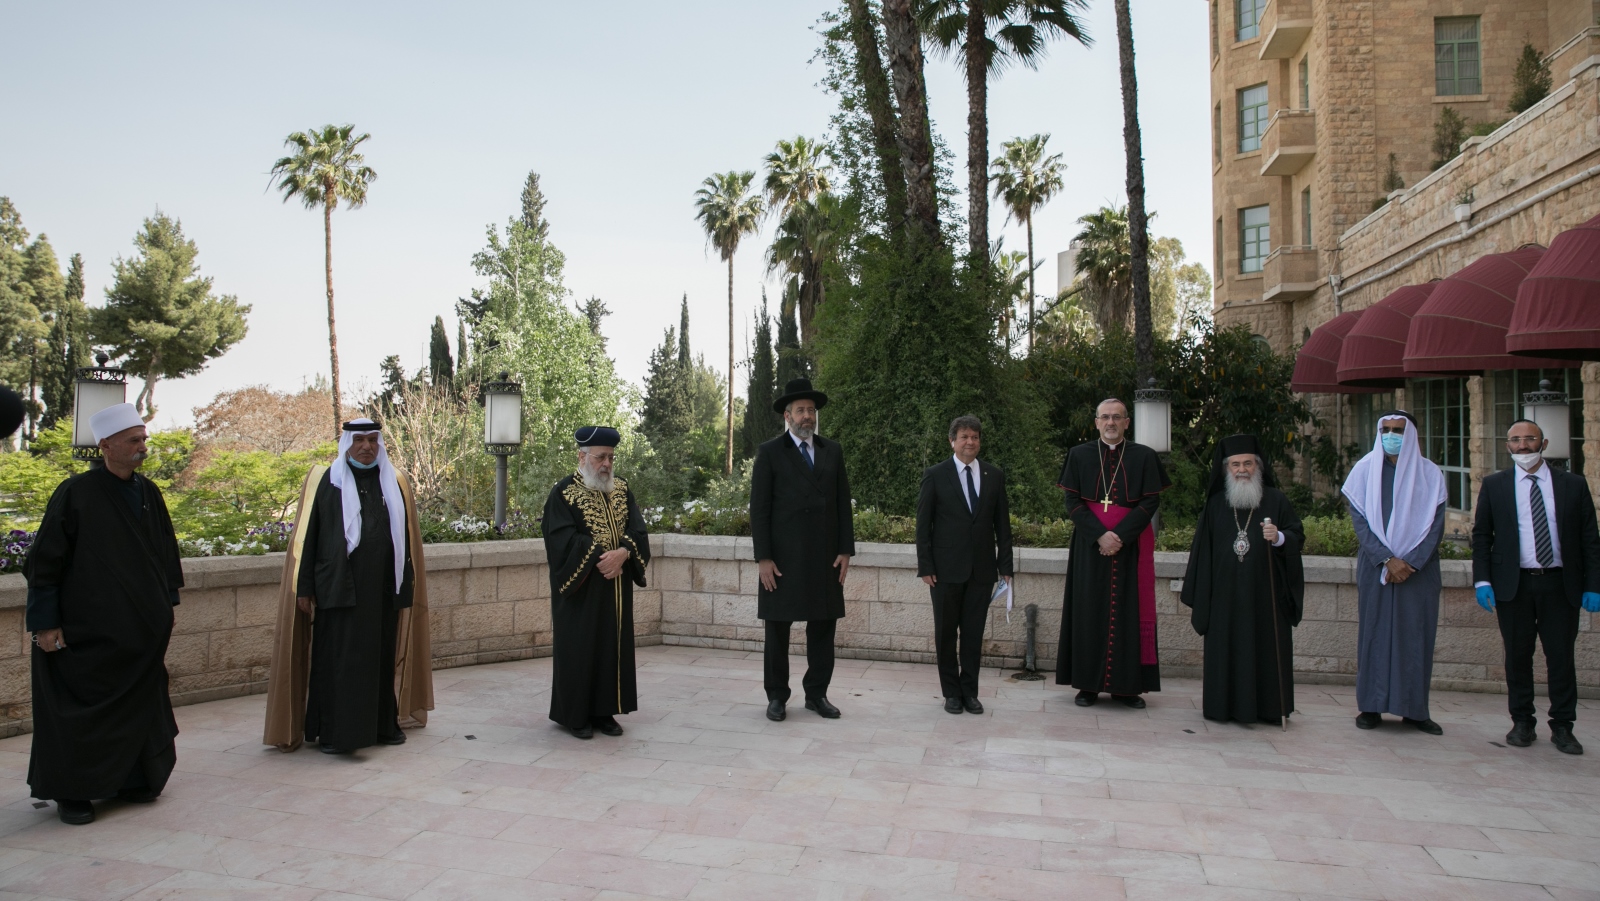 Spiritual leaders of all faiths attending a united prayer session outside the King David Hotel in Jerusalem, April 22, 2020. Photo by Olivier Fitoussi/Flash90